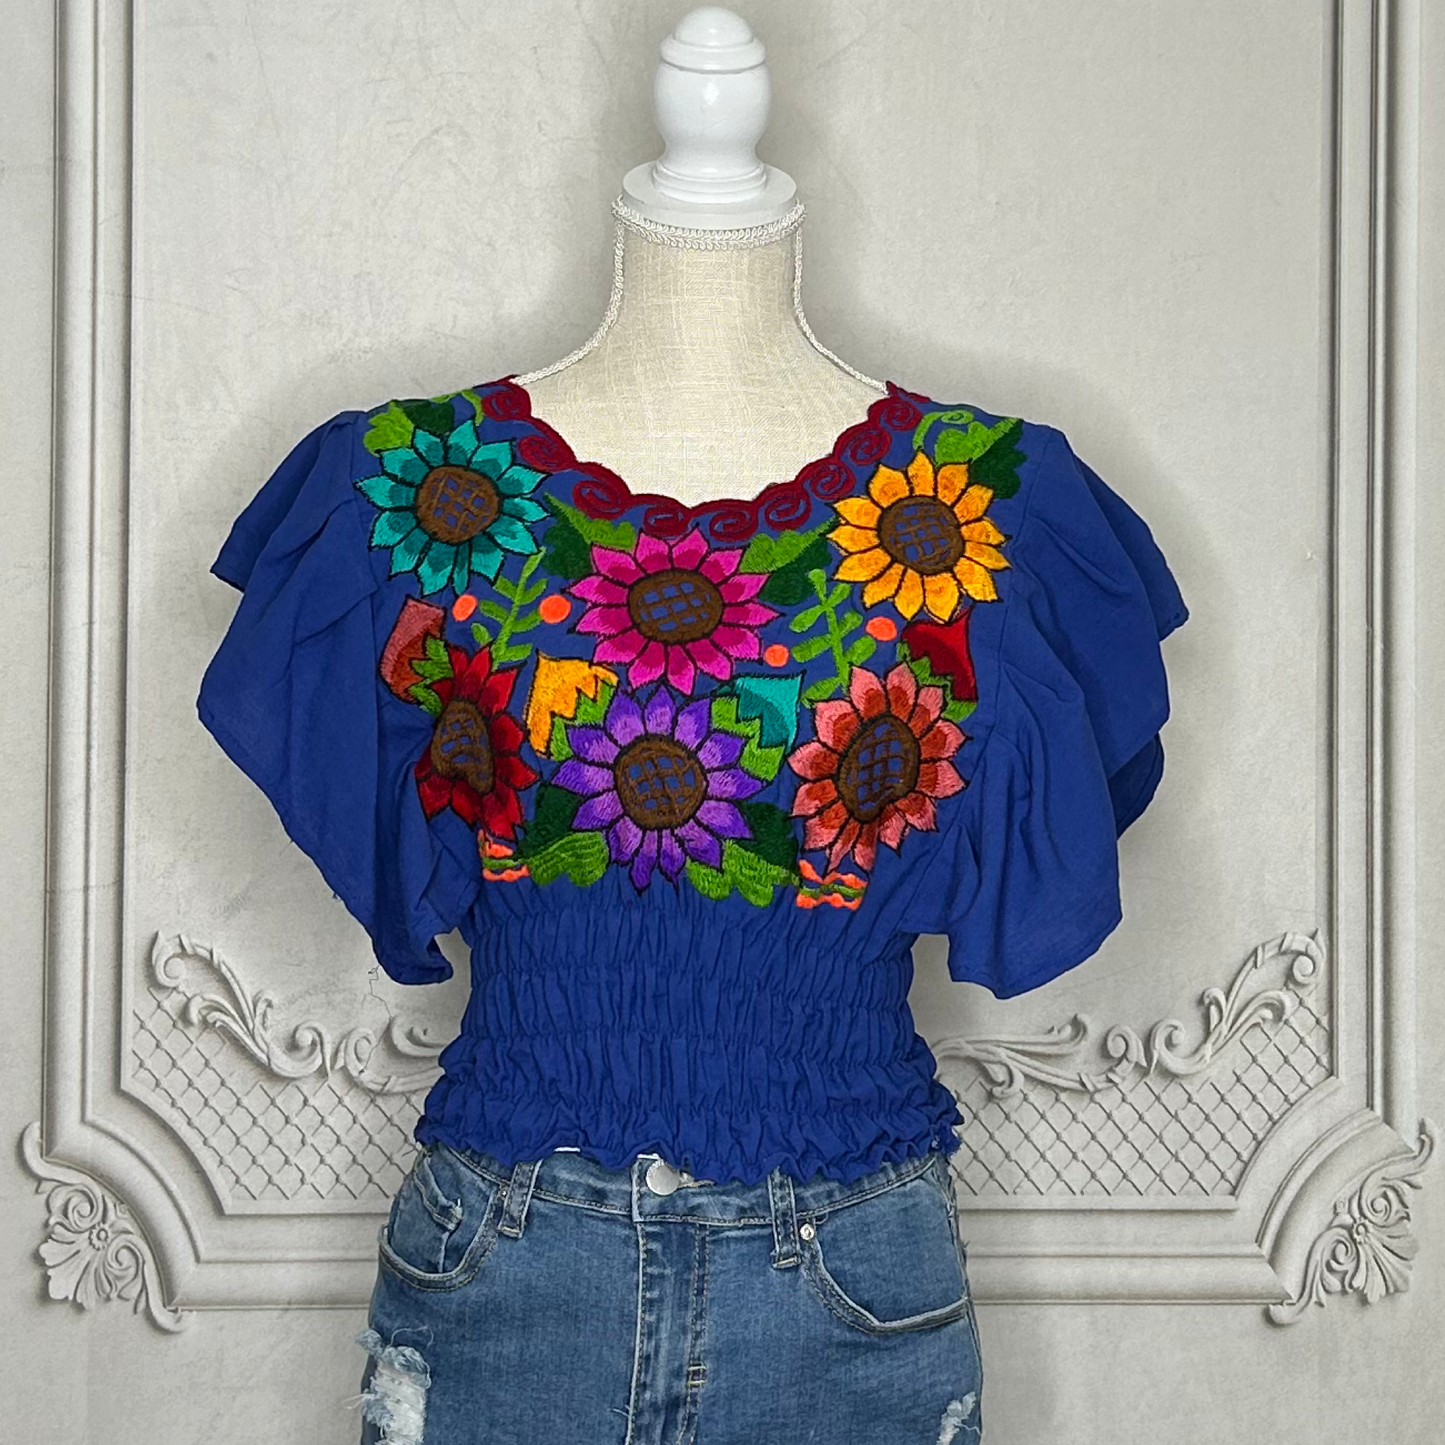 Butterfly Sleeve Mexican Crop Top Sunflower Multi